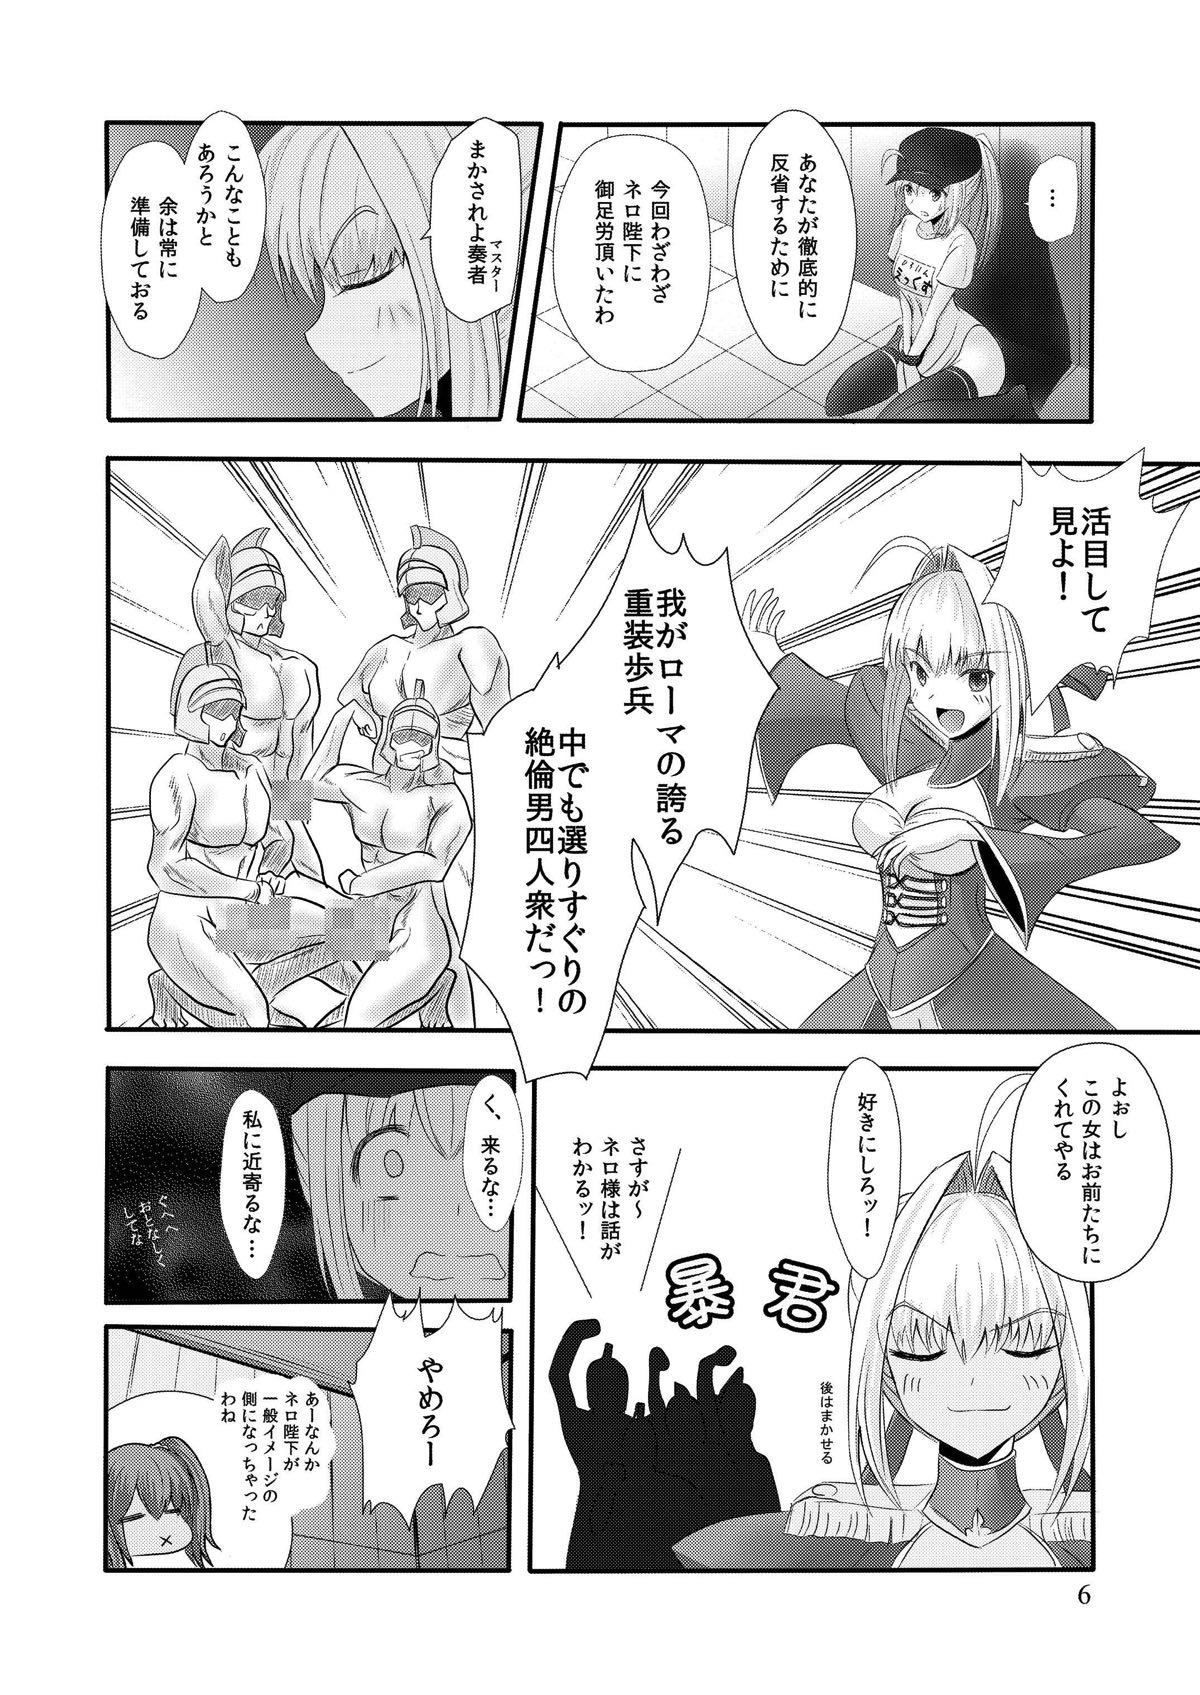 Bucetinha X!-MACHINA - Fate grand order Hot Pussy - Page 7